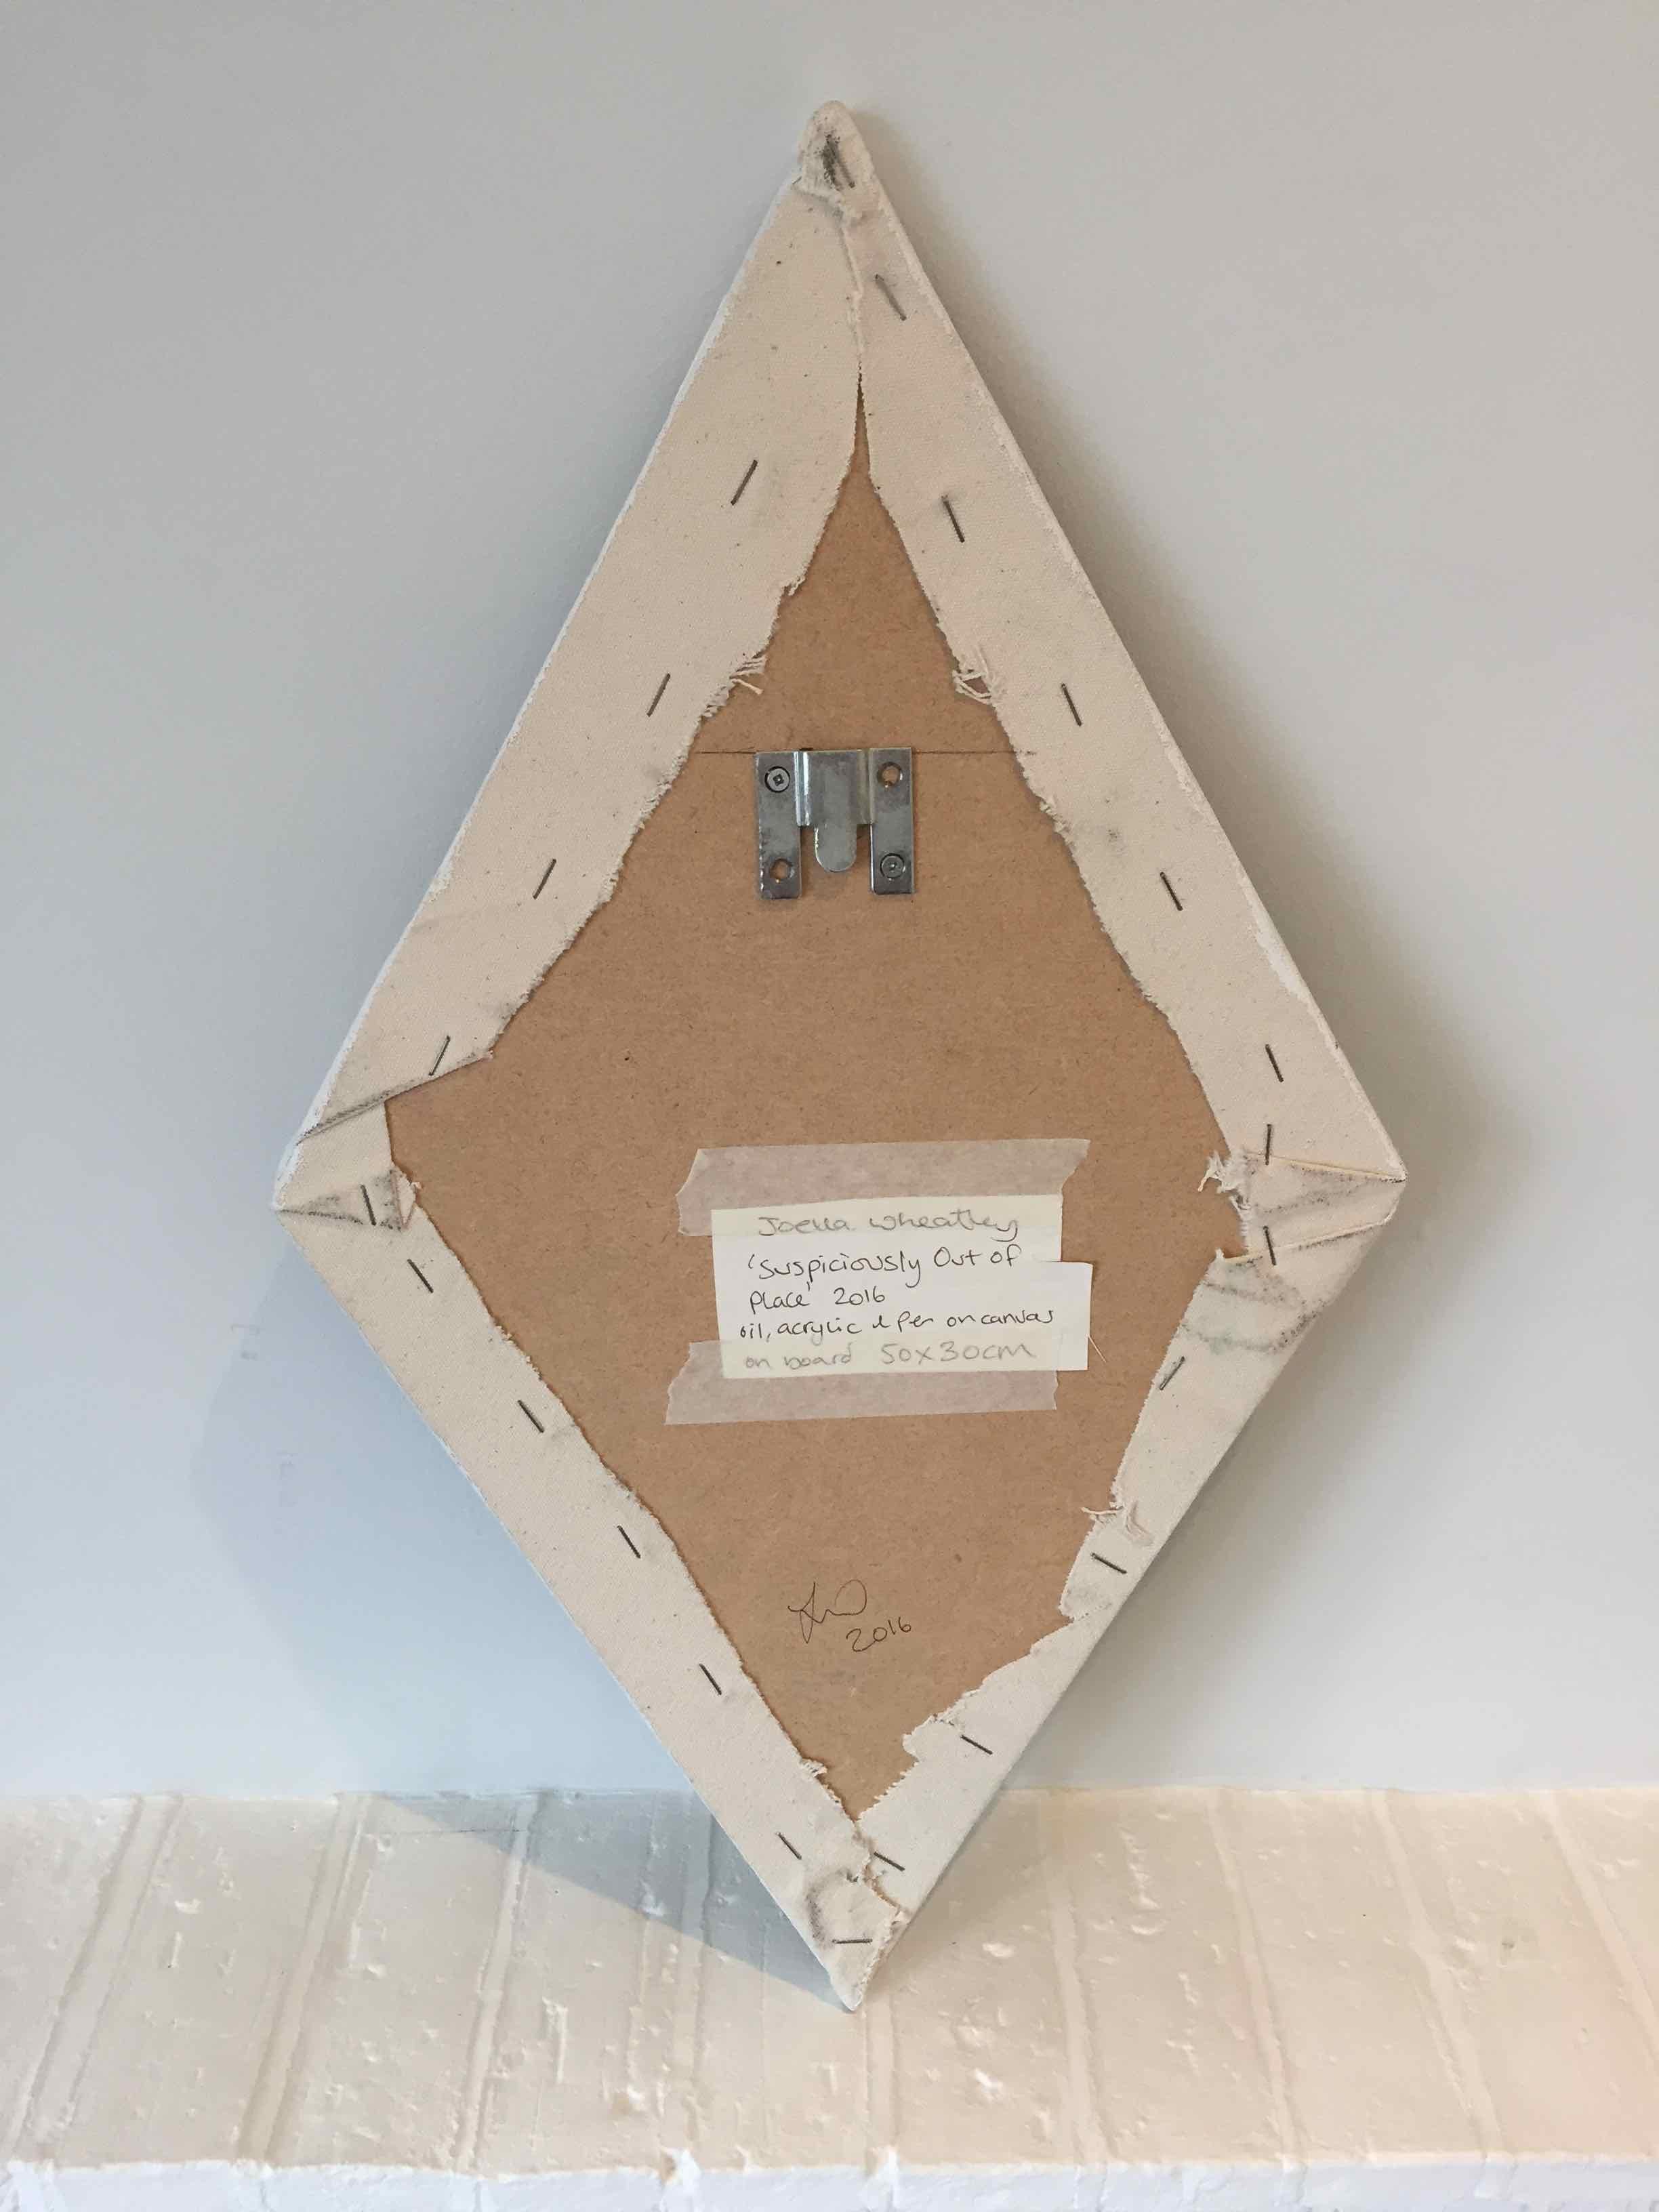 Suspiciously Out of Place by Joella Wheatley, 2016, Oil, acrylic and pen on canvas, stretched over board, 11 4/5 × 9 4/5 in; 30 × 25 cm

This diamond-shaped drawing/painting sits flat on the wall and the viewer is invited to move in close to examine